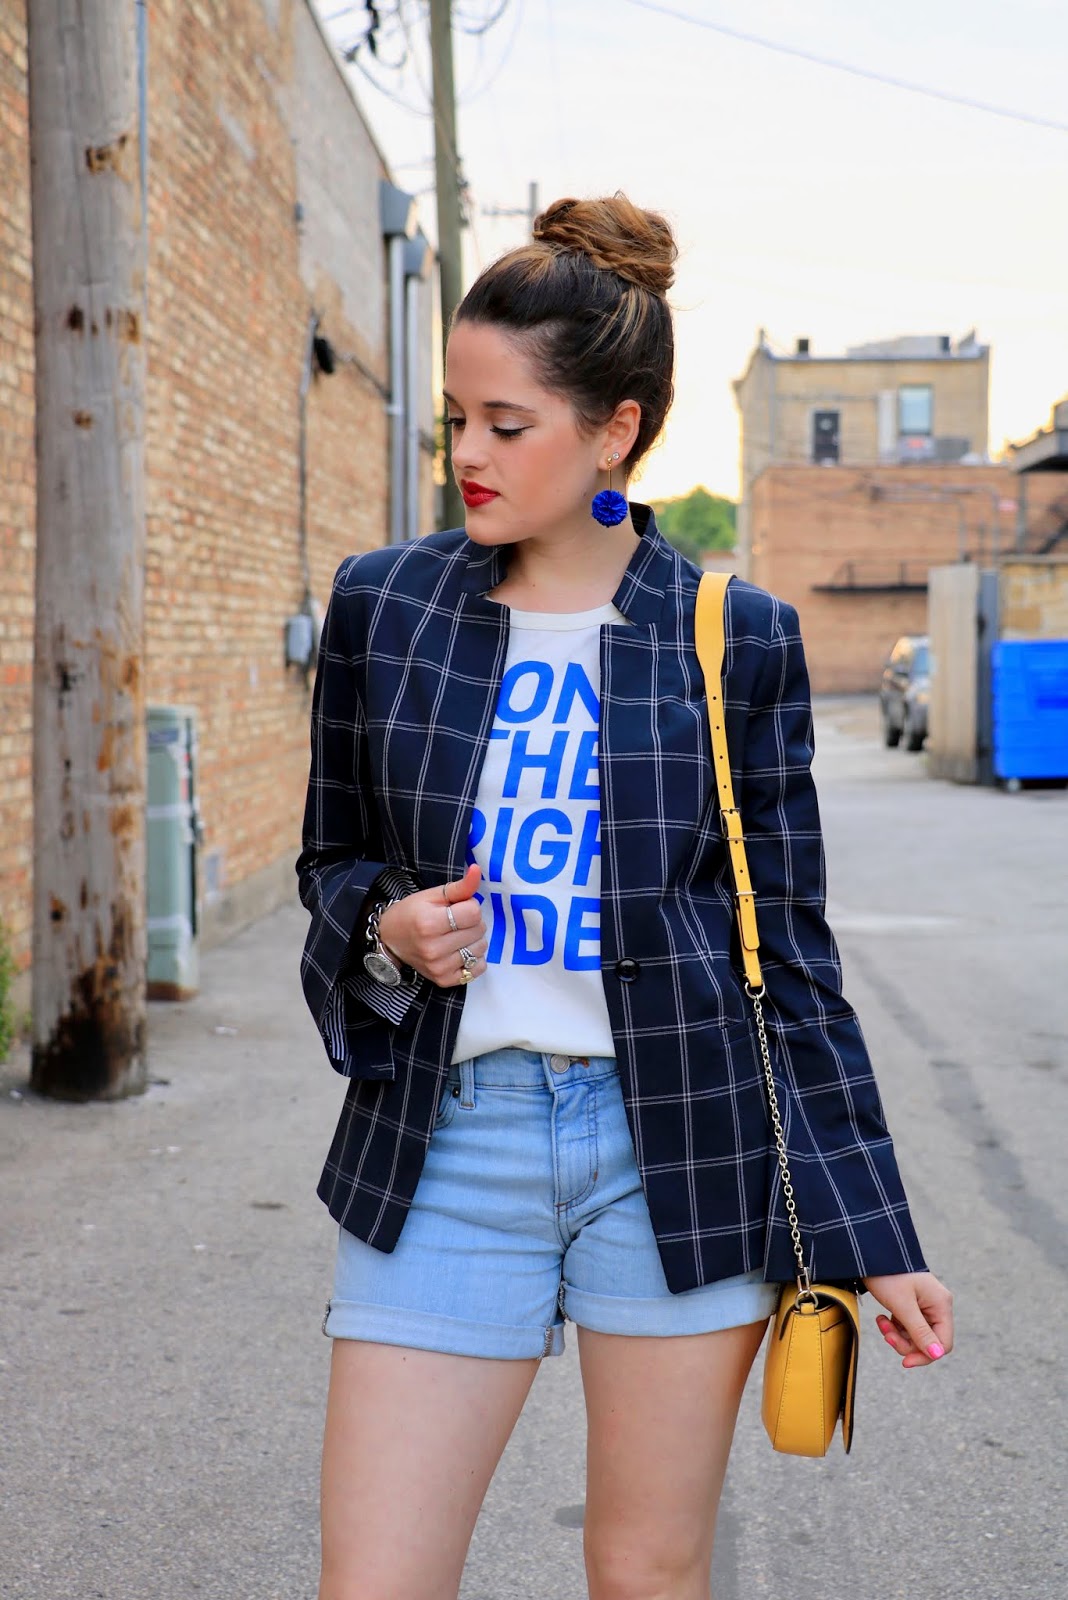 Nyc fashion blogger Kathleen Harper showing how to wear a blazer with shorts